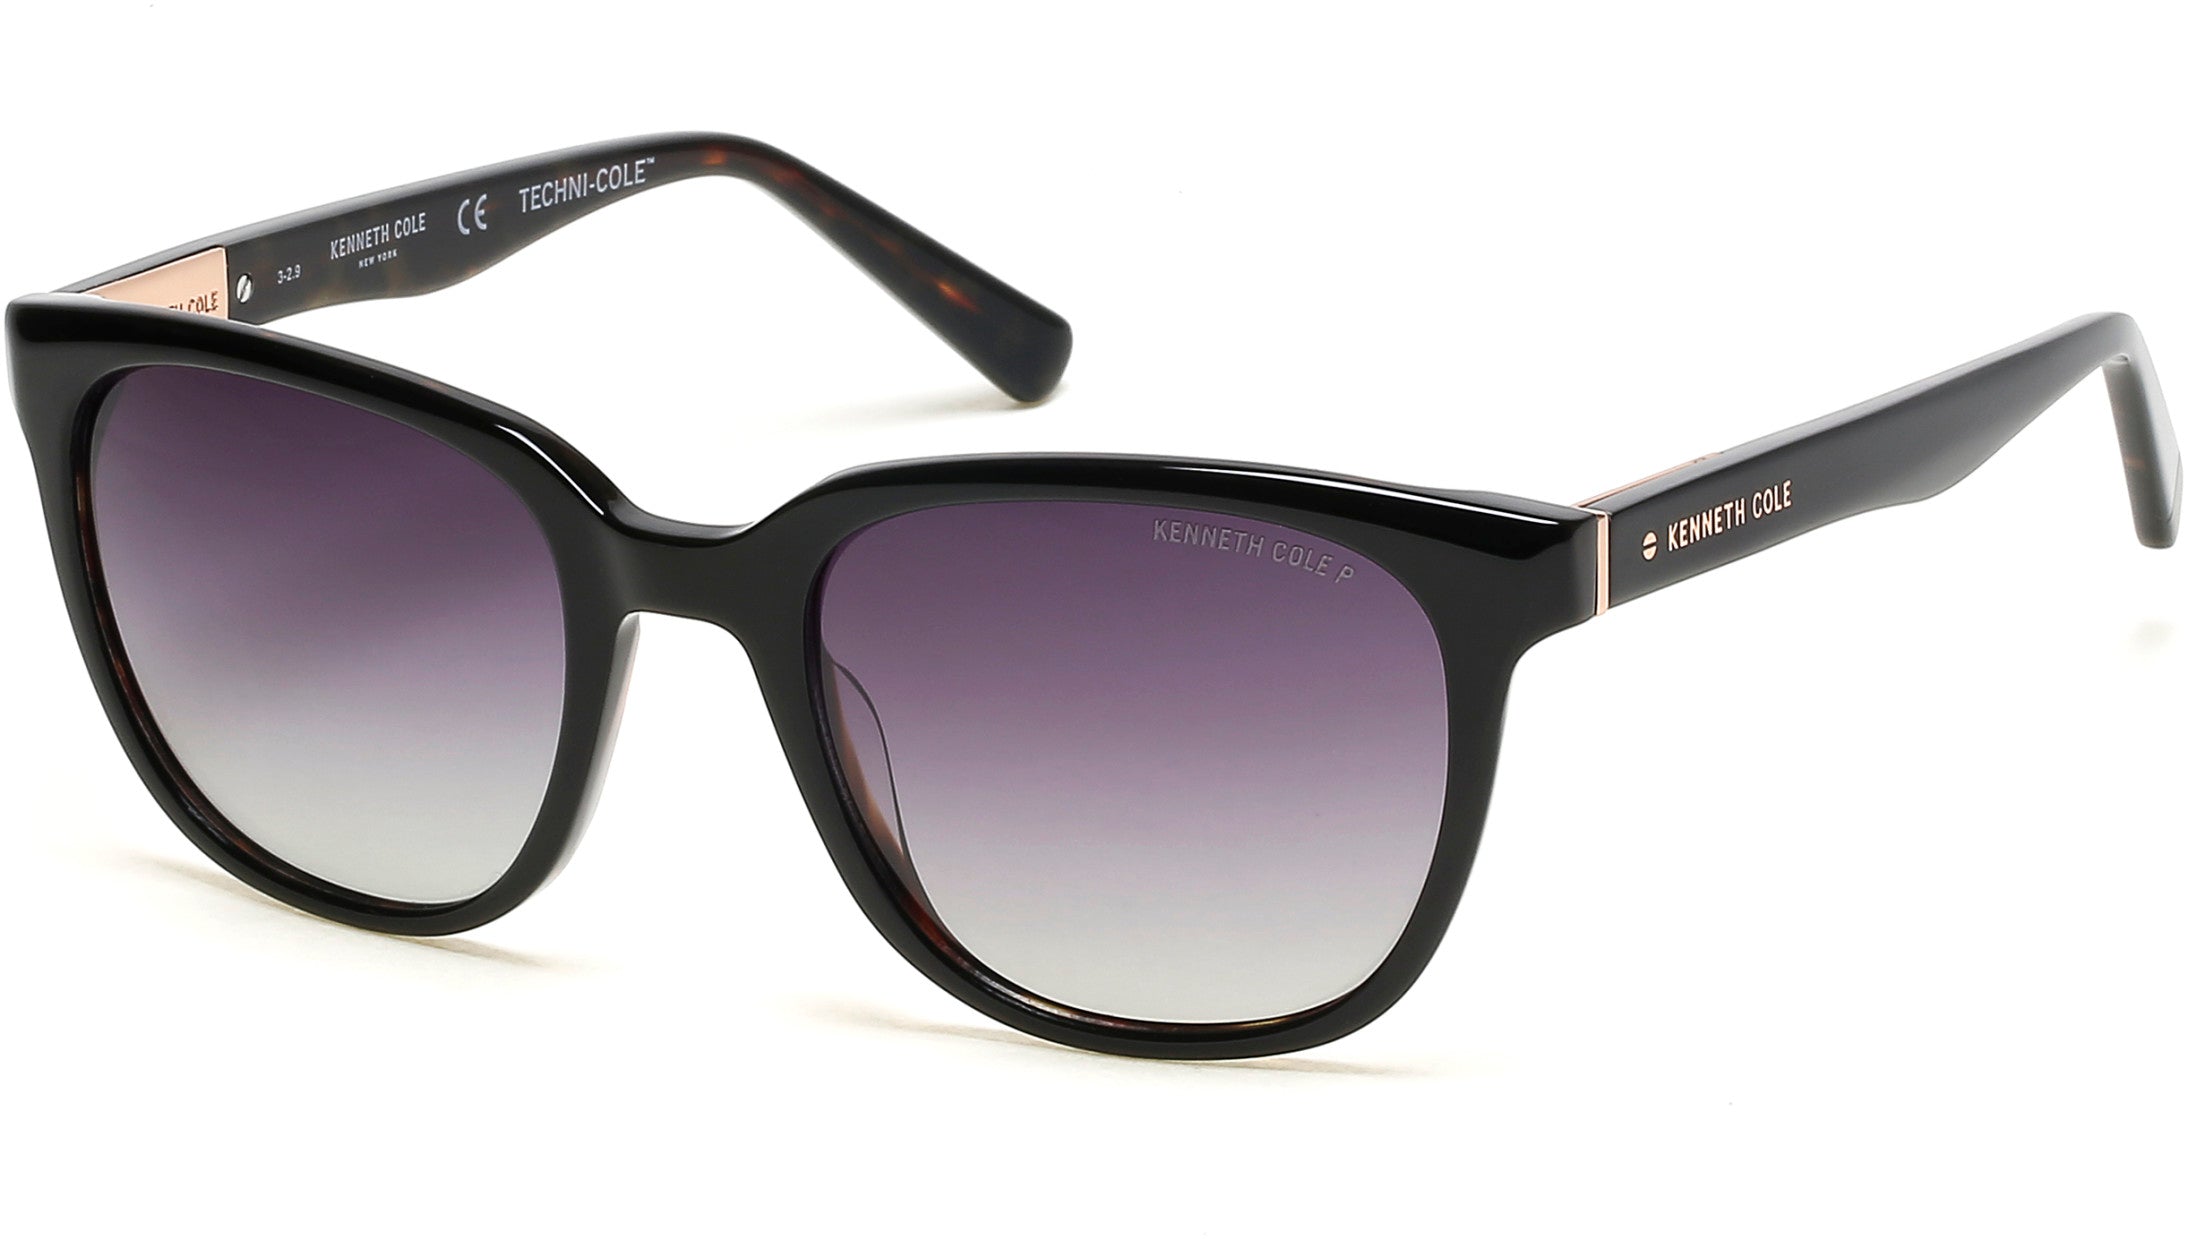 Kenneth Cole New York,Kenneth Cole Reaction KC7247 Square Sunglasses 05D-05D - Black / Smoke Polarized